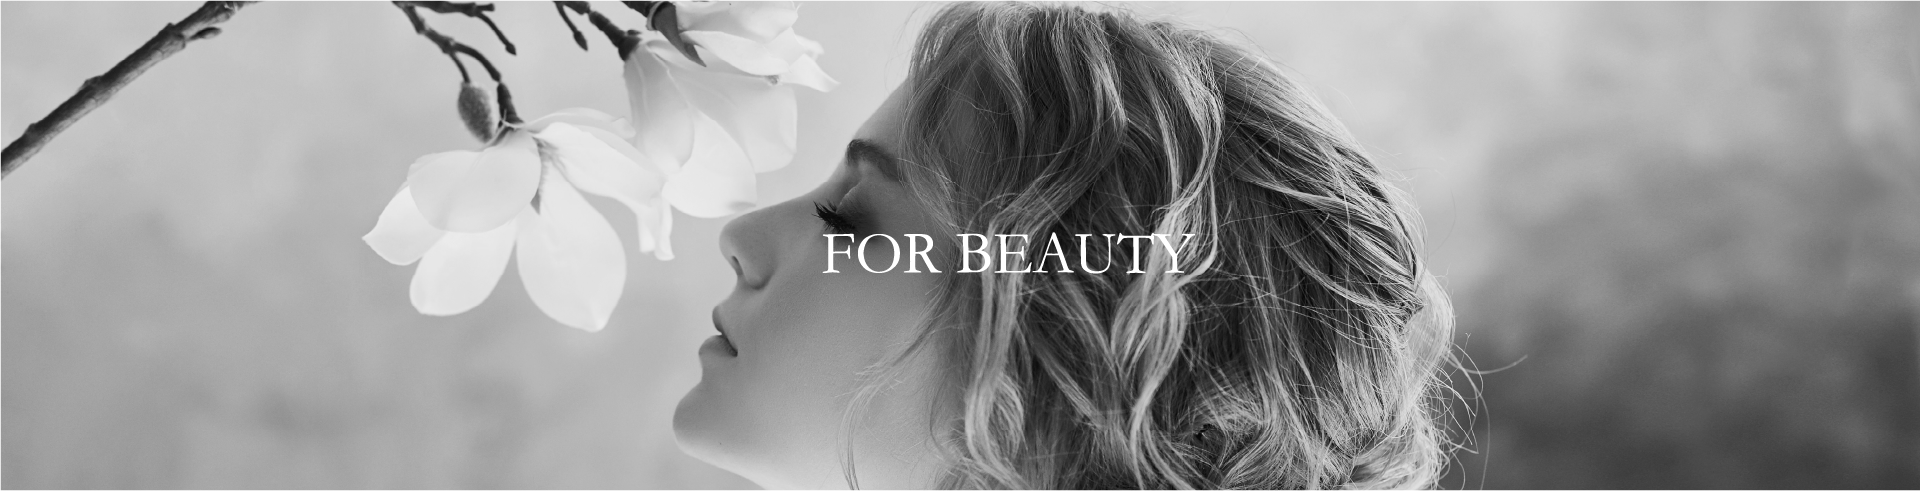 FOR BEAUTY